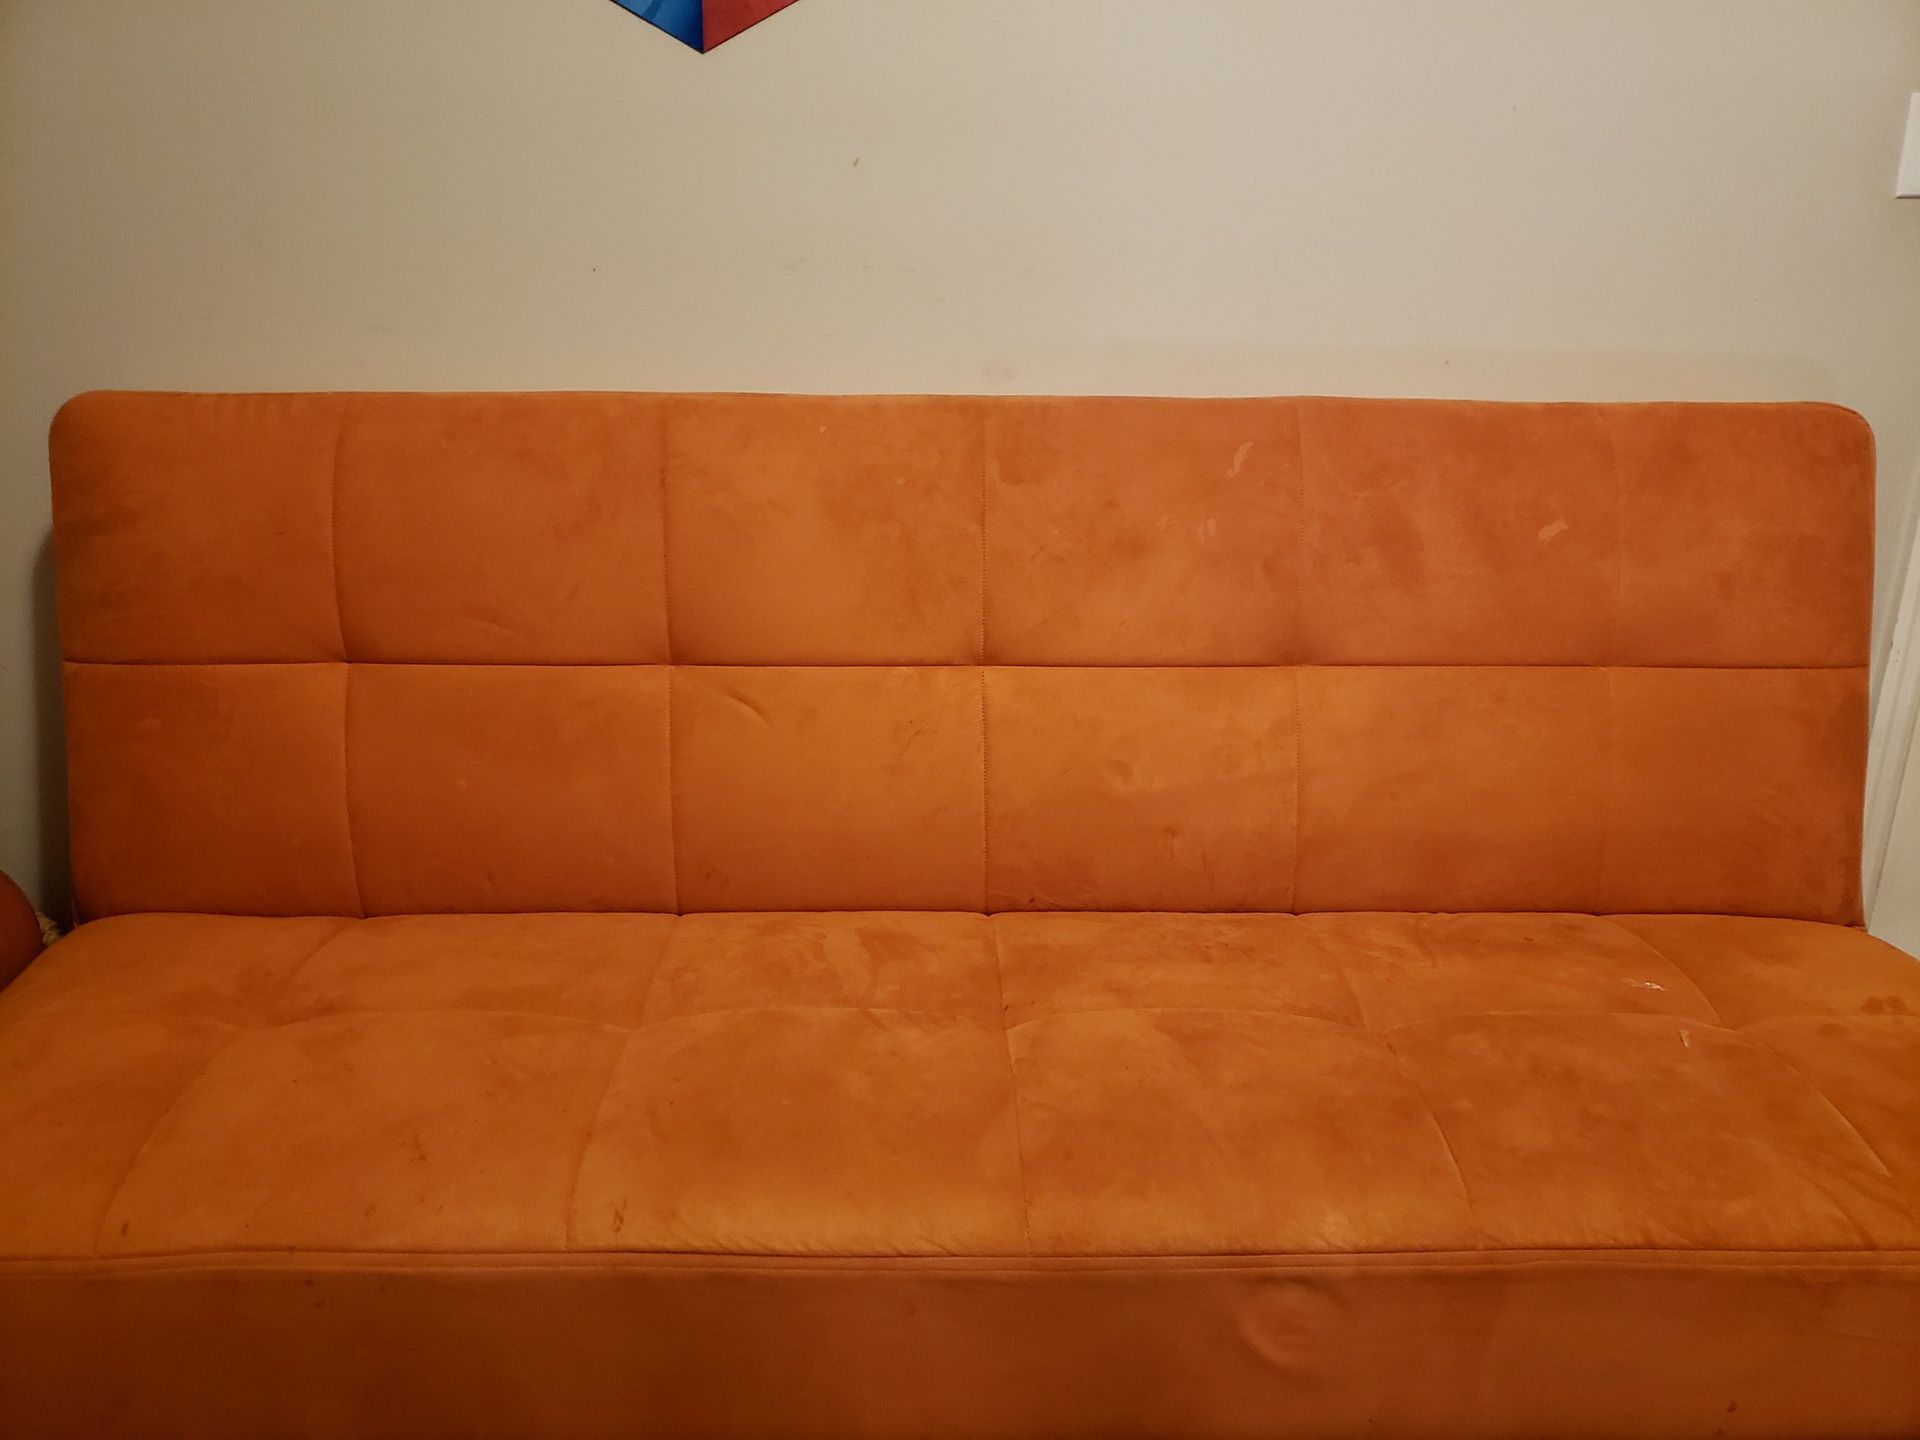 Fold out Futon like couch. Slightly used.